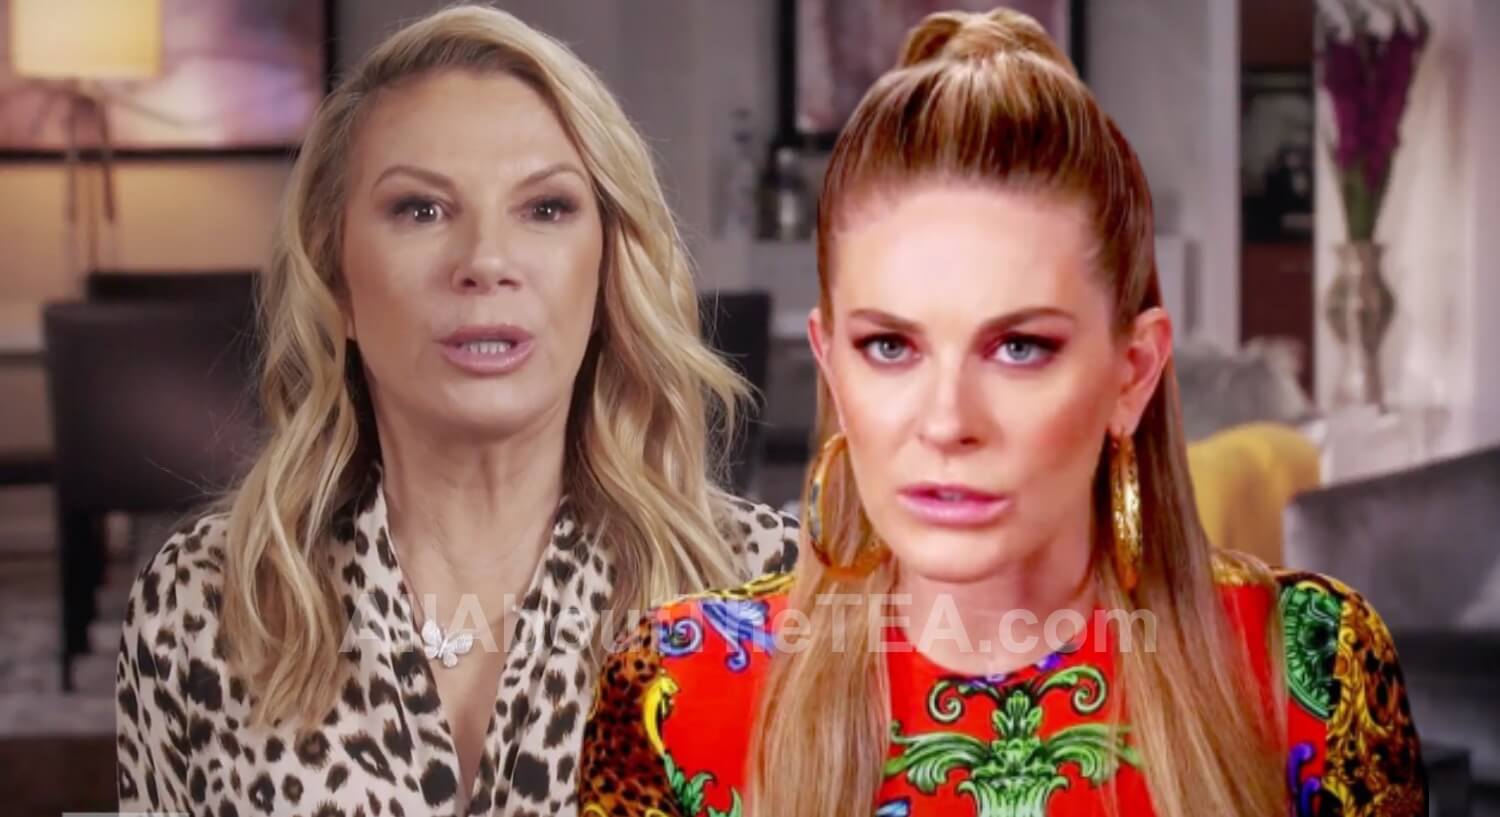 Ramona Singer Claps Back After Leah McSweeney Claims She ‘Sh*ts During Sex’ PLUS Ramona Says Elyse Slaine Used Her!